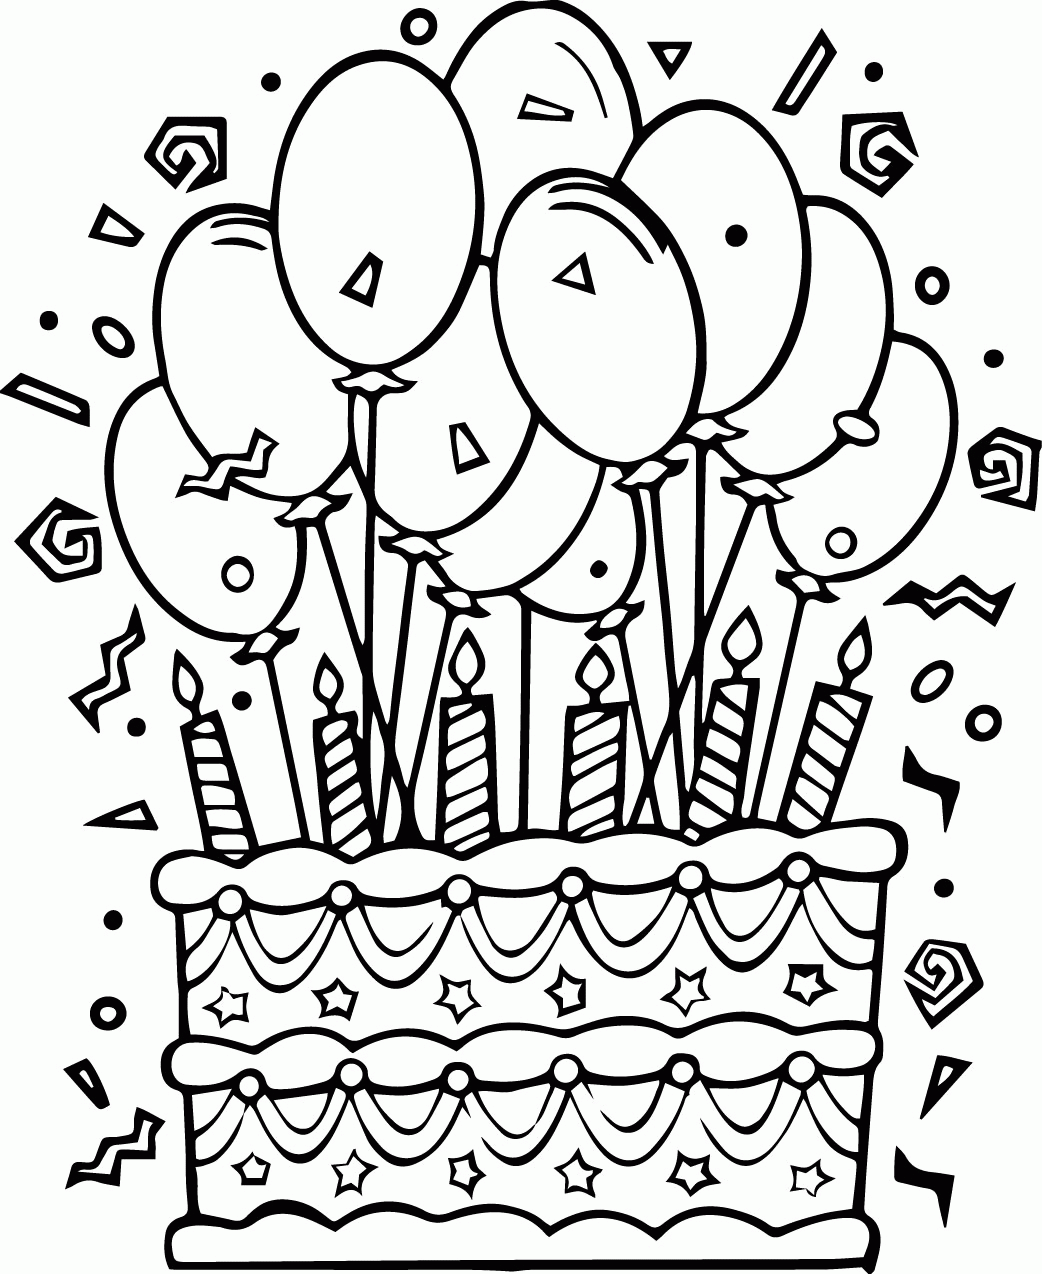 Birthday Cake Coloring Pages | Wecoloringpage